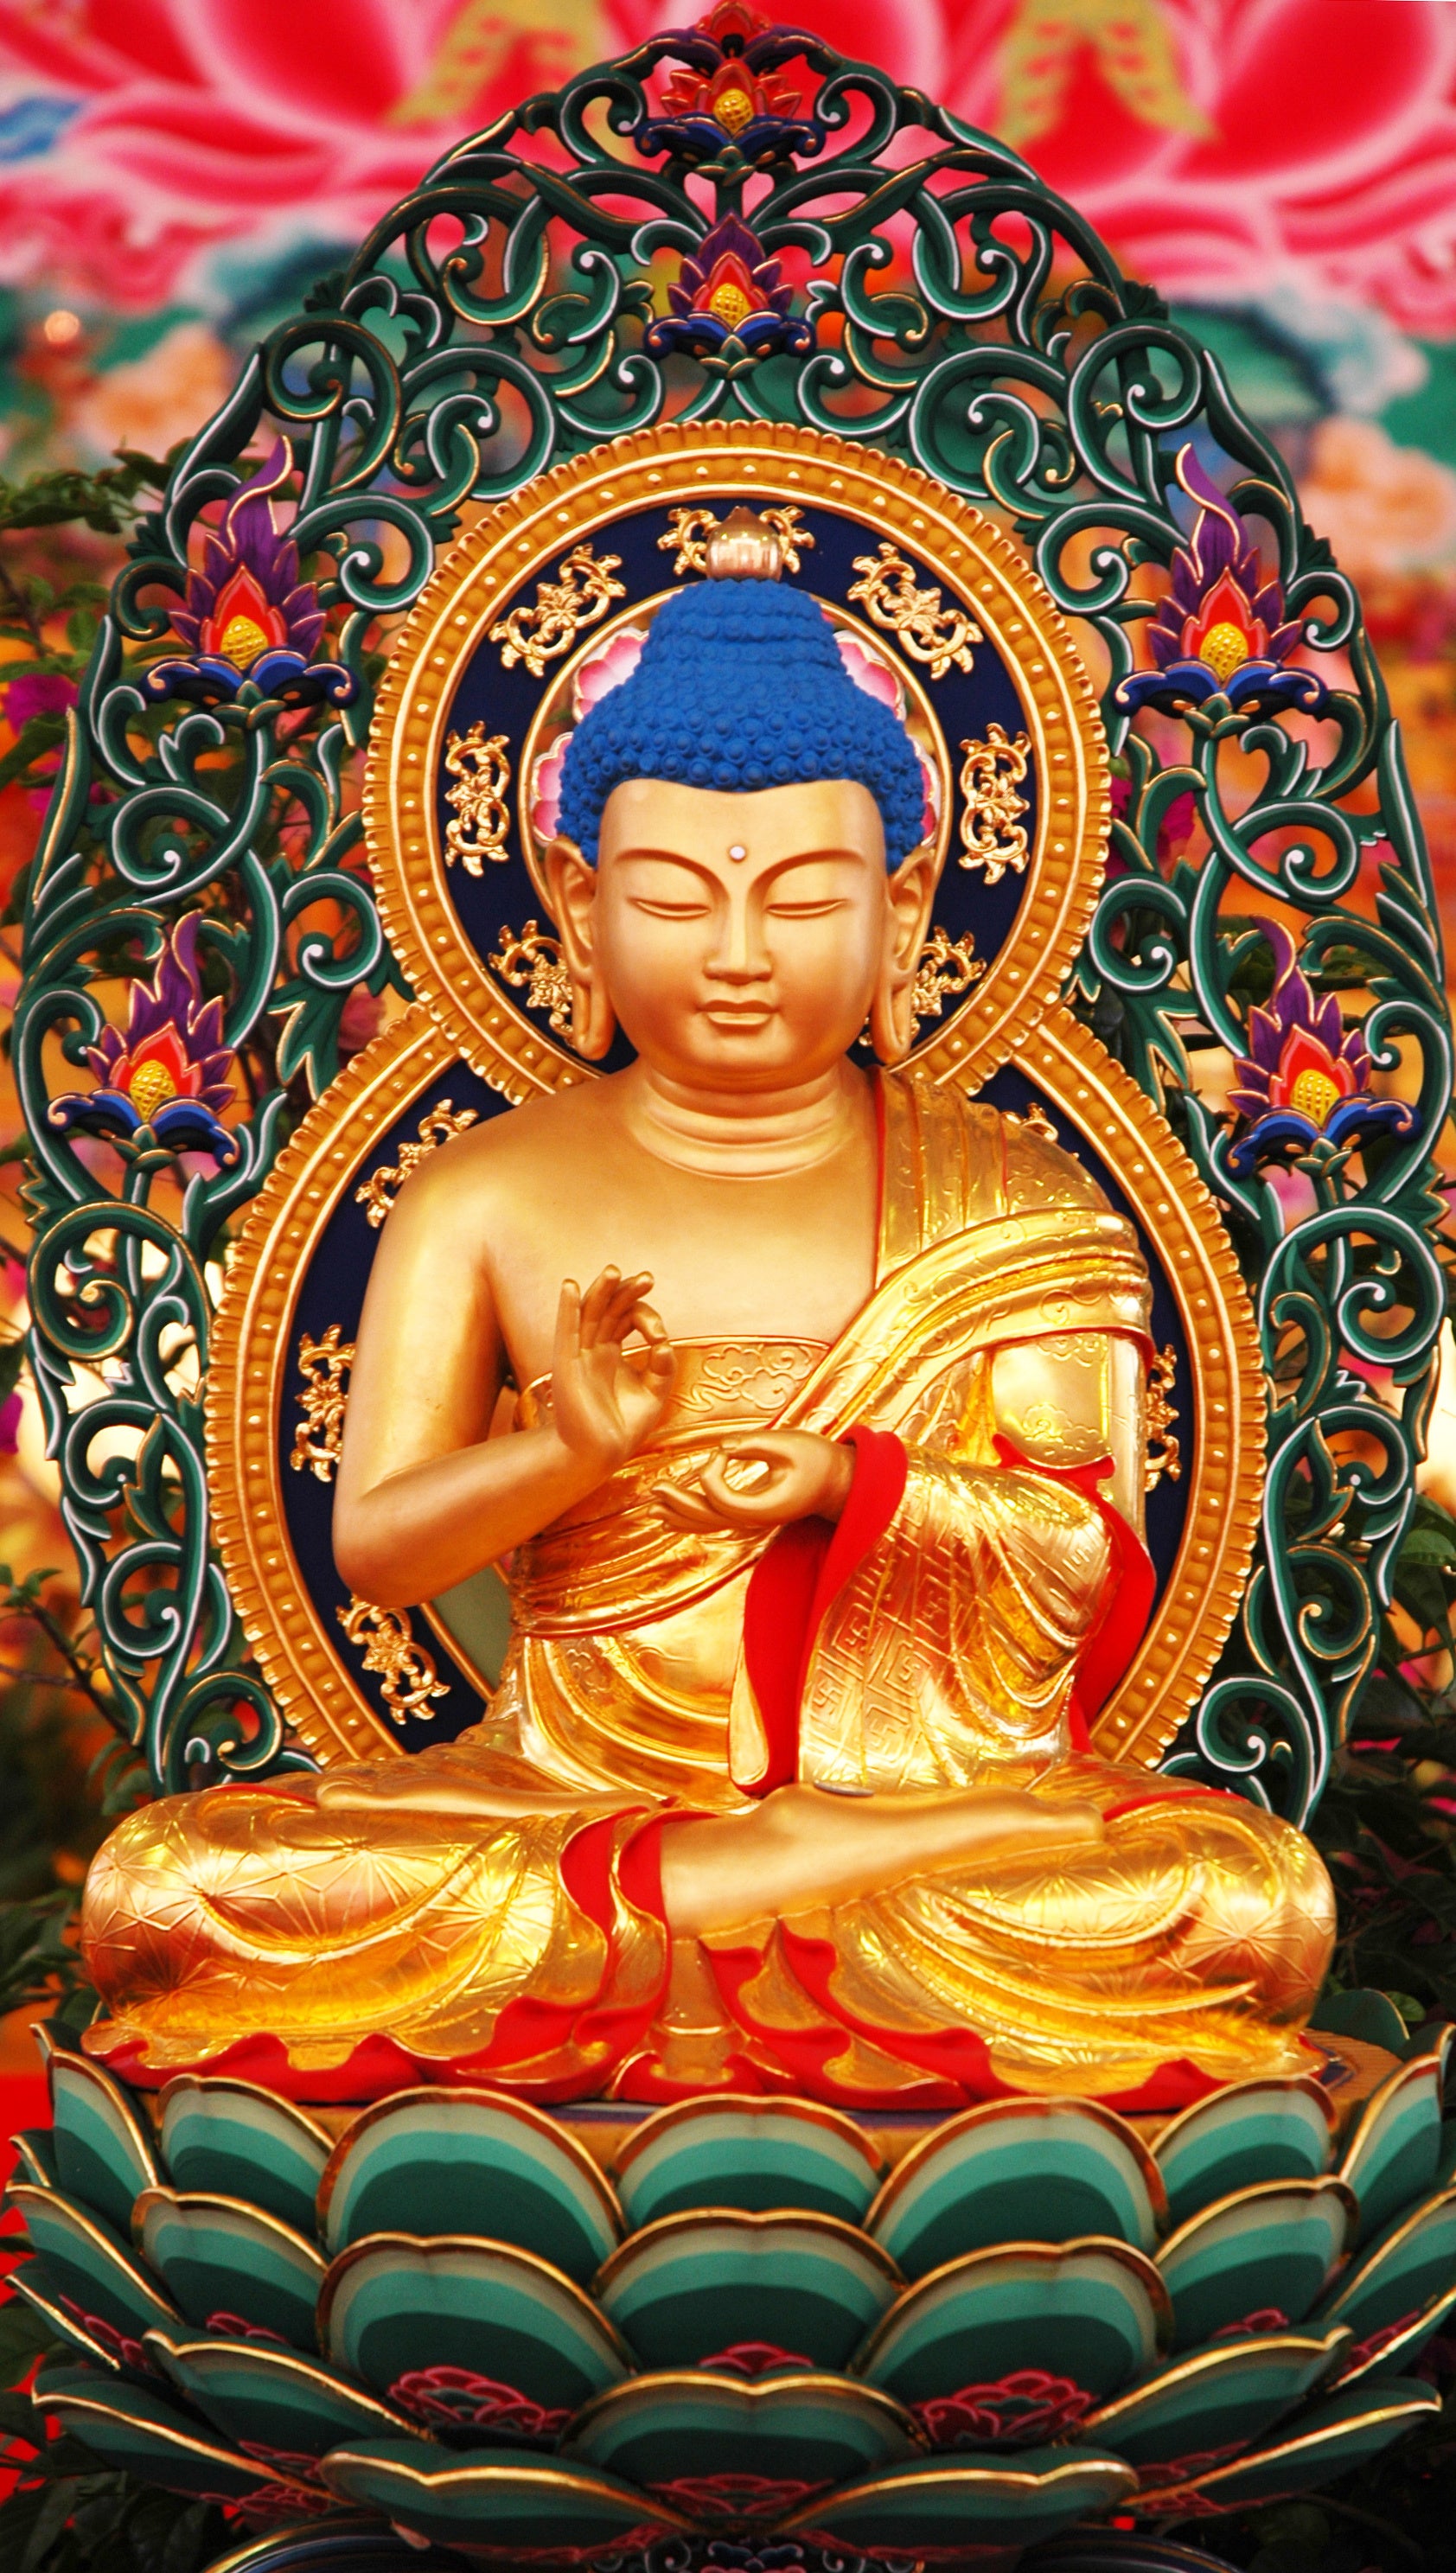 Buy wholesale Picture Buddha Background Flowers